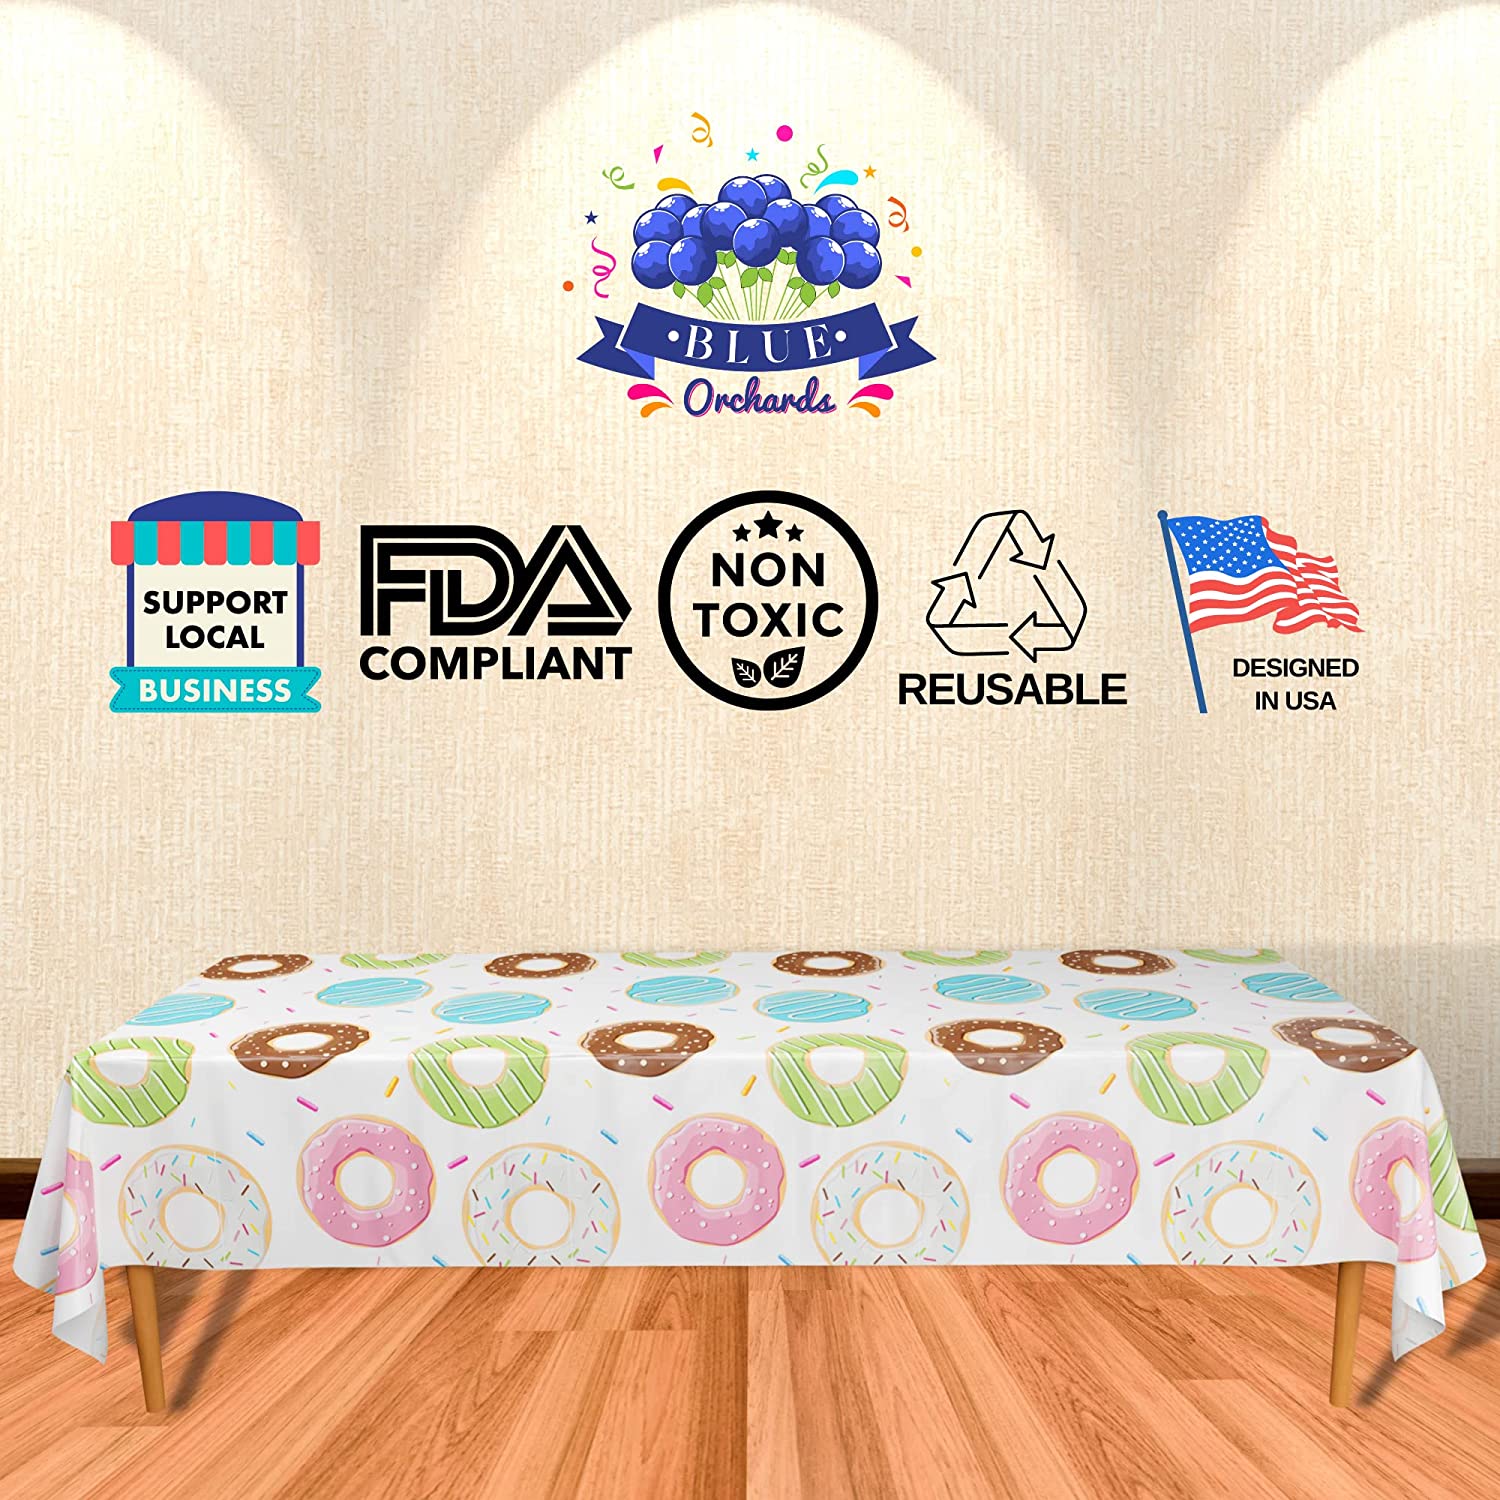 Waterproof and Durable Plastic Donut Table Cover, FDA compliant, non toxic, reusable, designed in USA